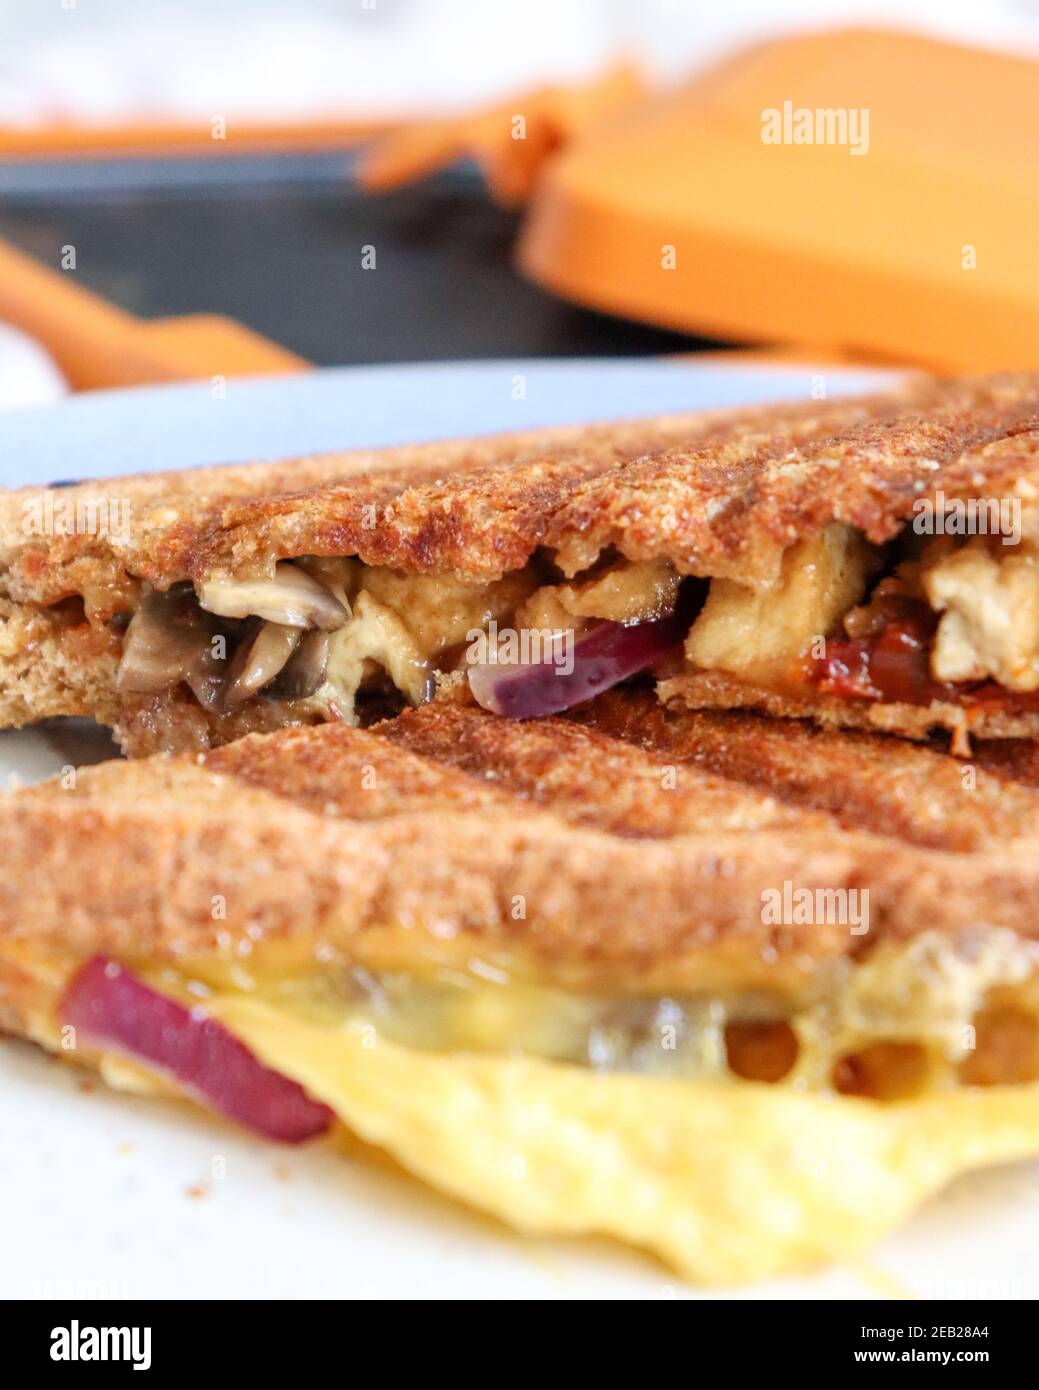 https://c8.alamy.com/comp/2EB28A4/morphy-richards-mico-toastie-toasted-sandwiches-microwave-cookware-kitchen-food-preparation-cooking-snack-grilled-sandwich-ve-2EB28A4.jpg